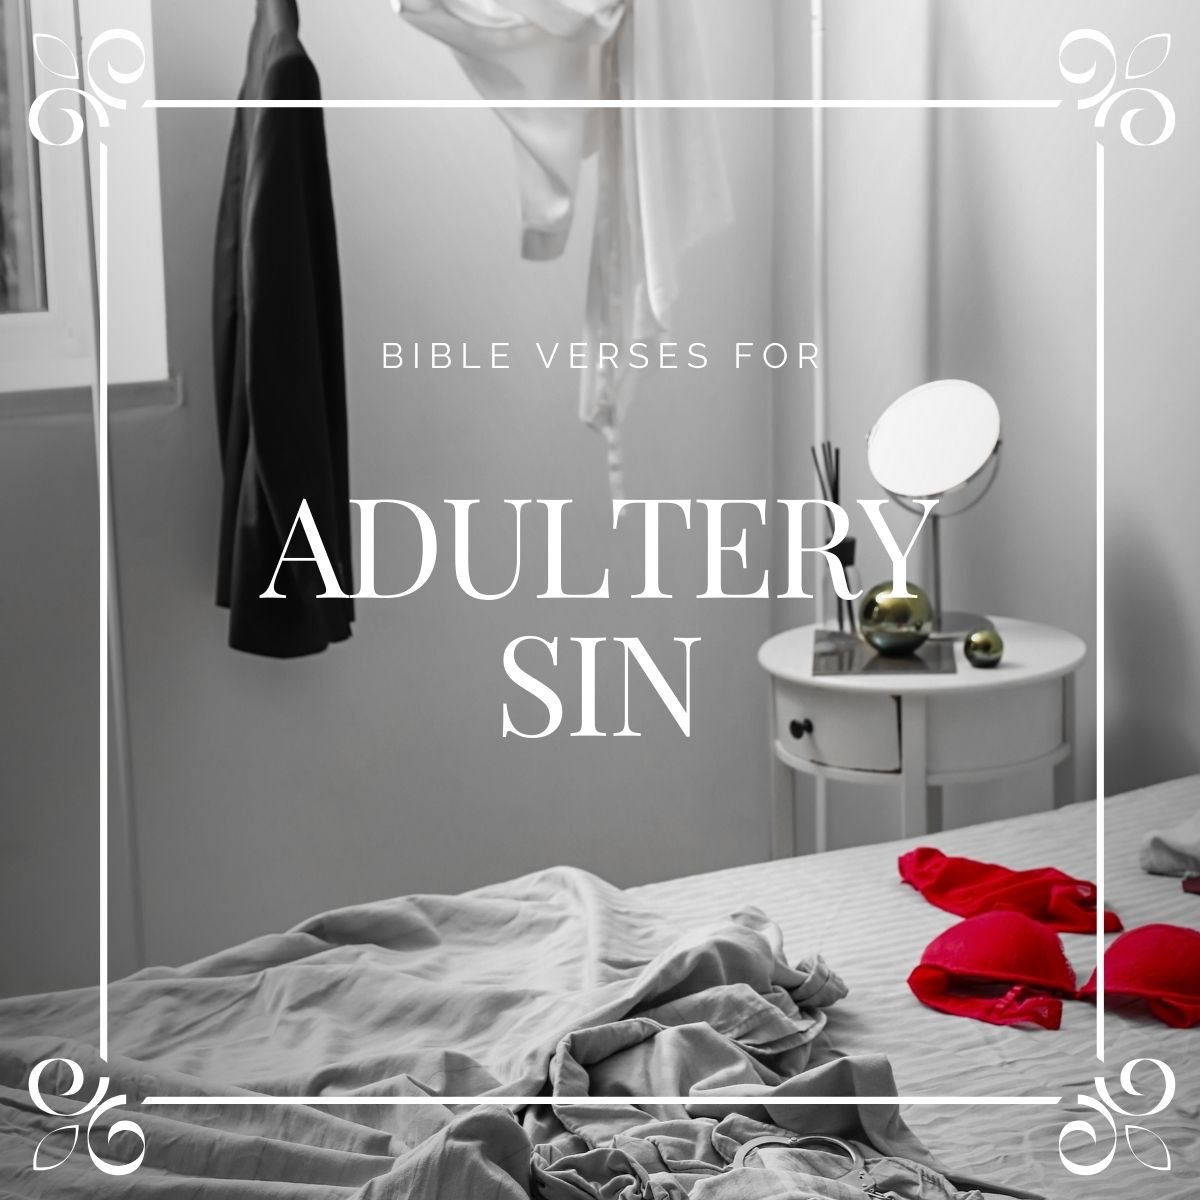 The Bible Verses For Adultery Sin